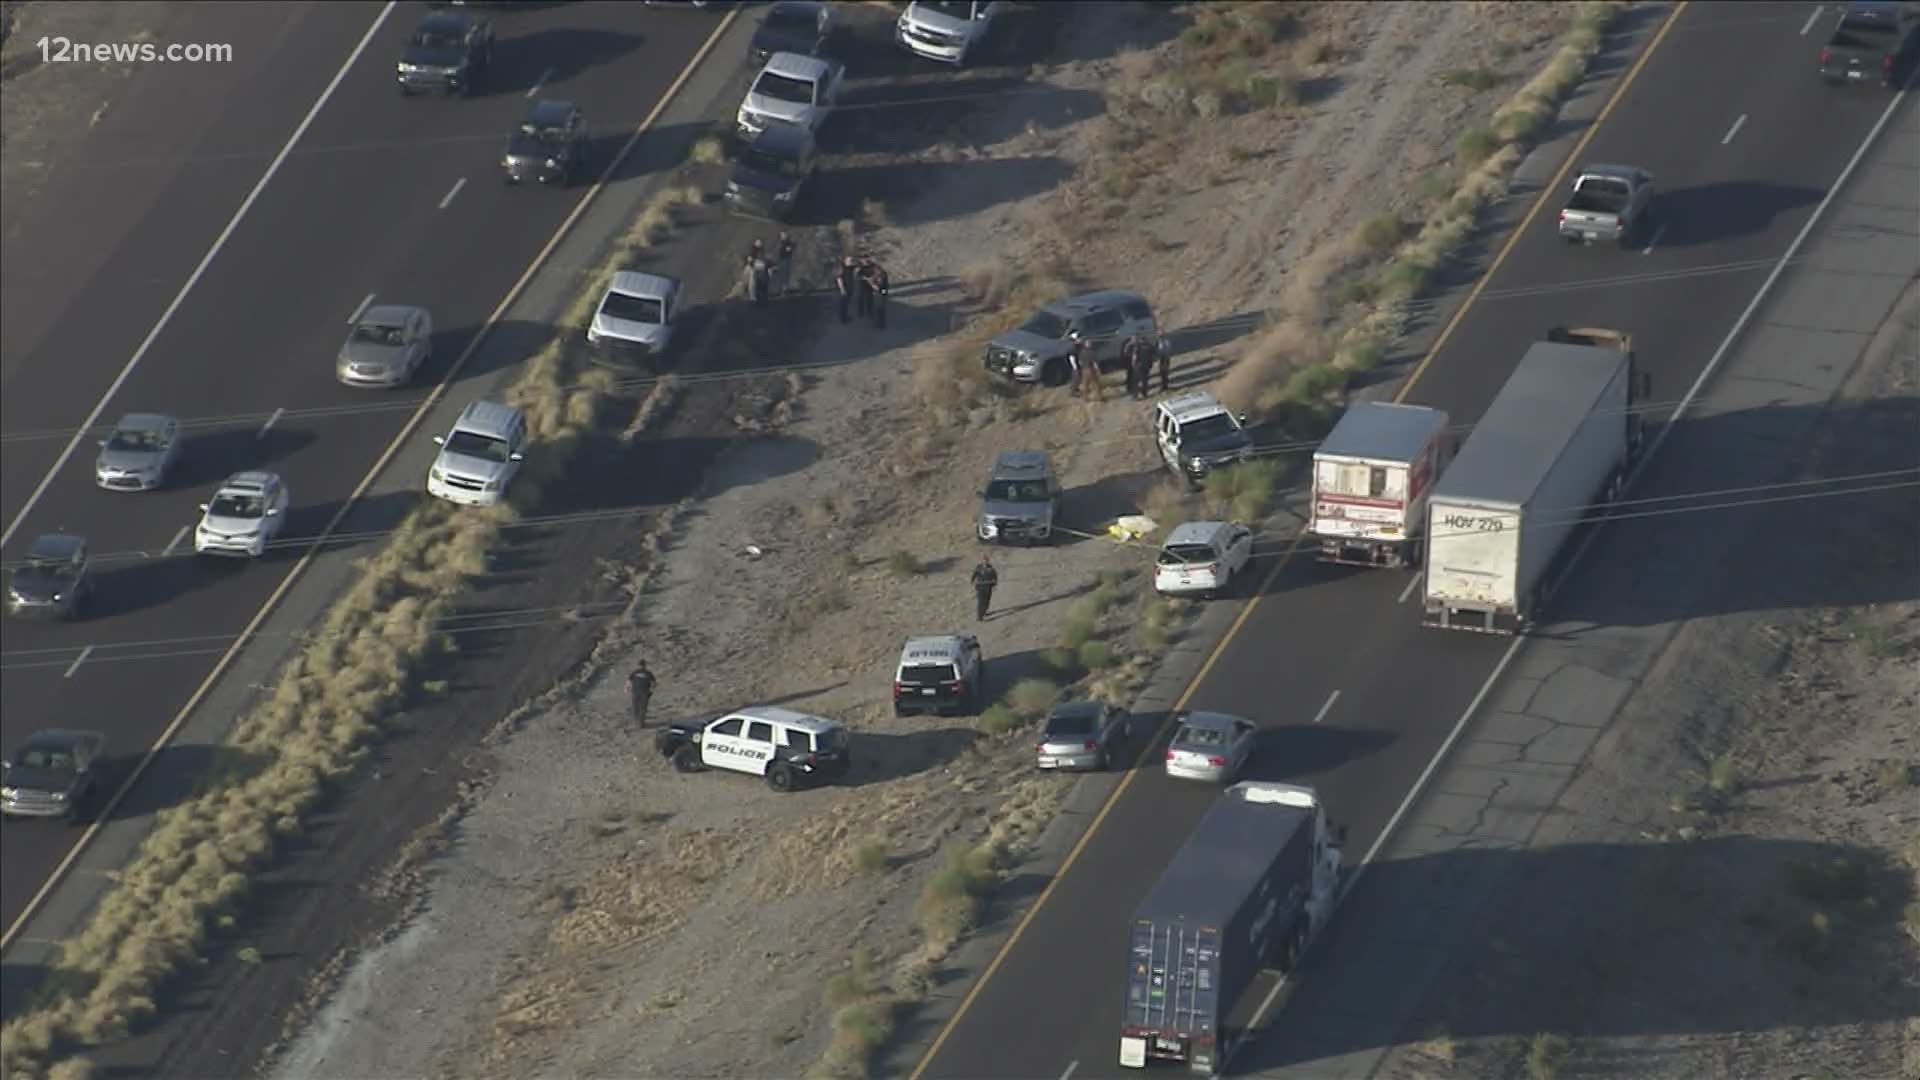 A dead person has been found in the median of I-10 in Buckeye. Police are on the scene and traffic will be an issue.